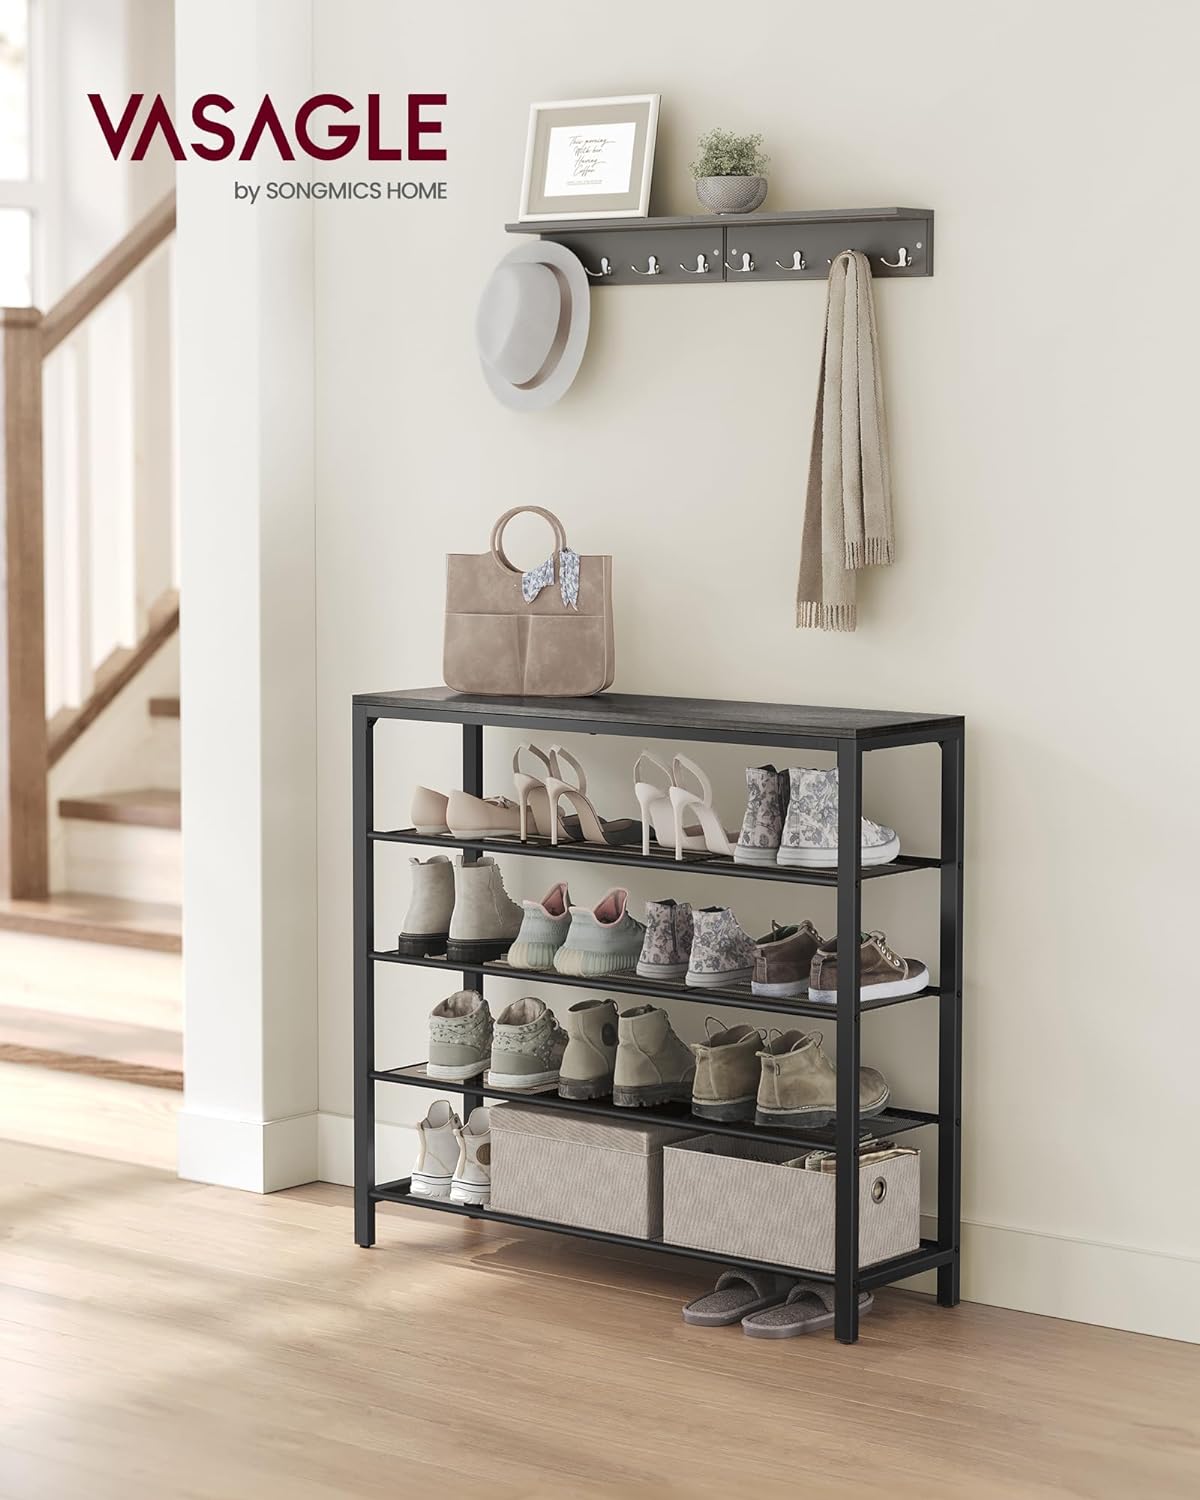 https://bigbigmart.com/wp-content/uploads/2023/12/VASAGLE-INDESTIC-Shoe-Rack-Storage-Organizer-with-4-Mesh-Shelves-and-Large-Surface-for-Bags-Shoe-Shelf-for-Entryway-Hallway-Closet-Steel-Frame-Industrial-Charcoal-Gray-and-Black-ULBS015B041.jpg